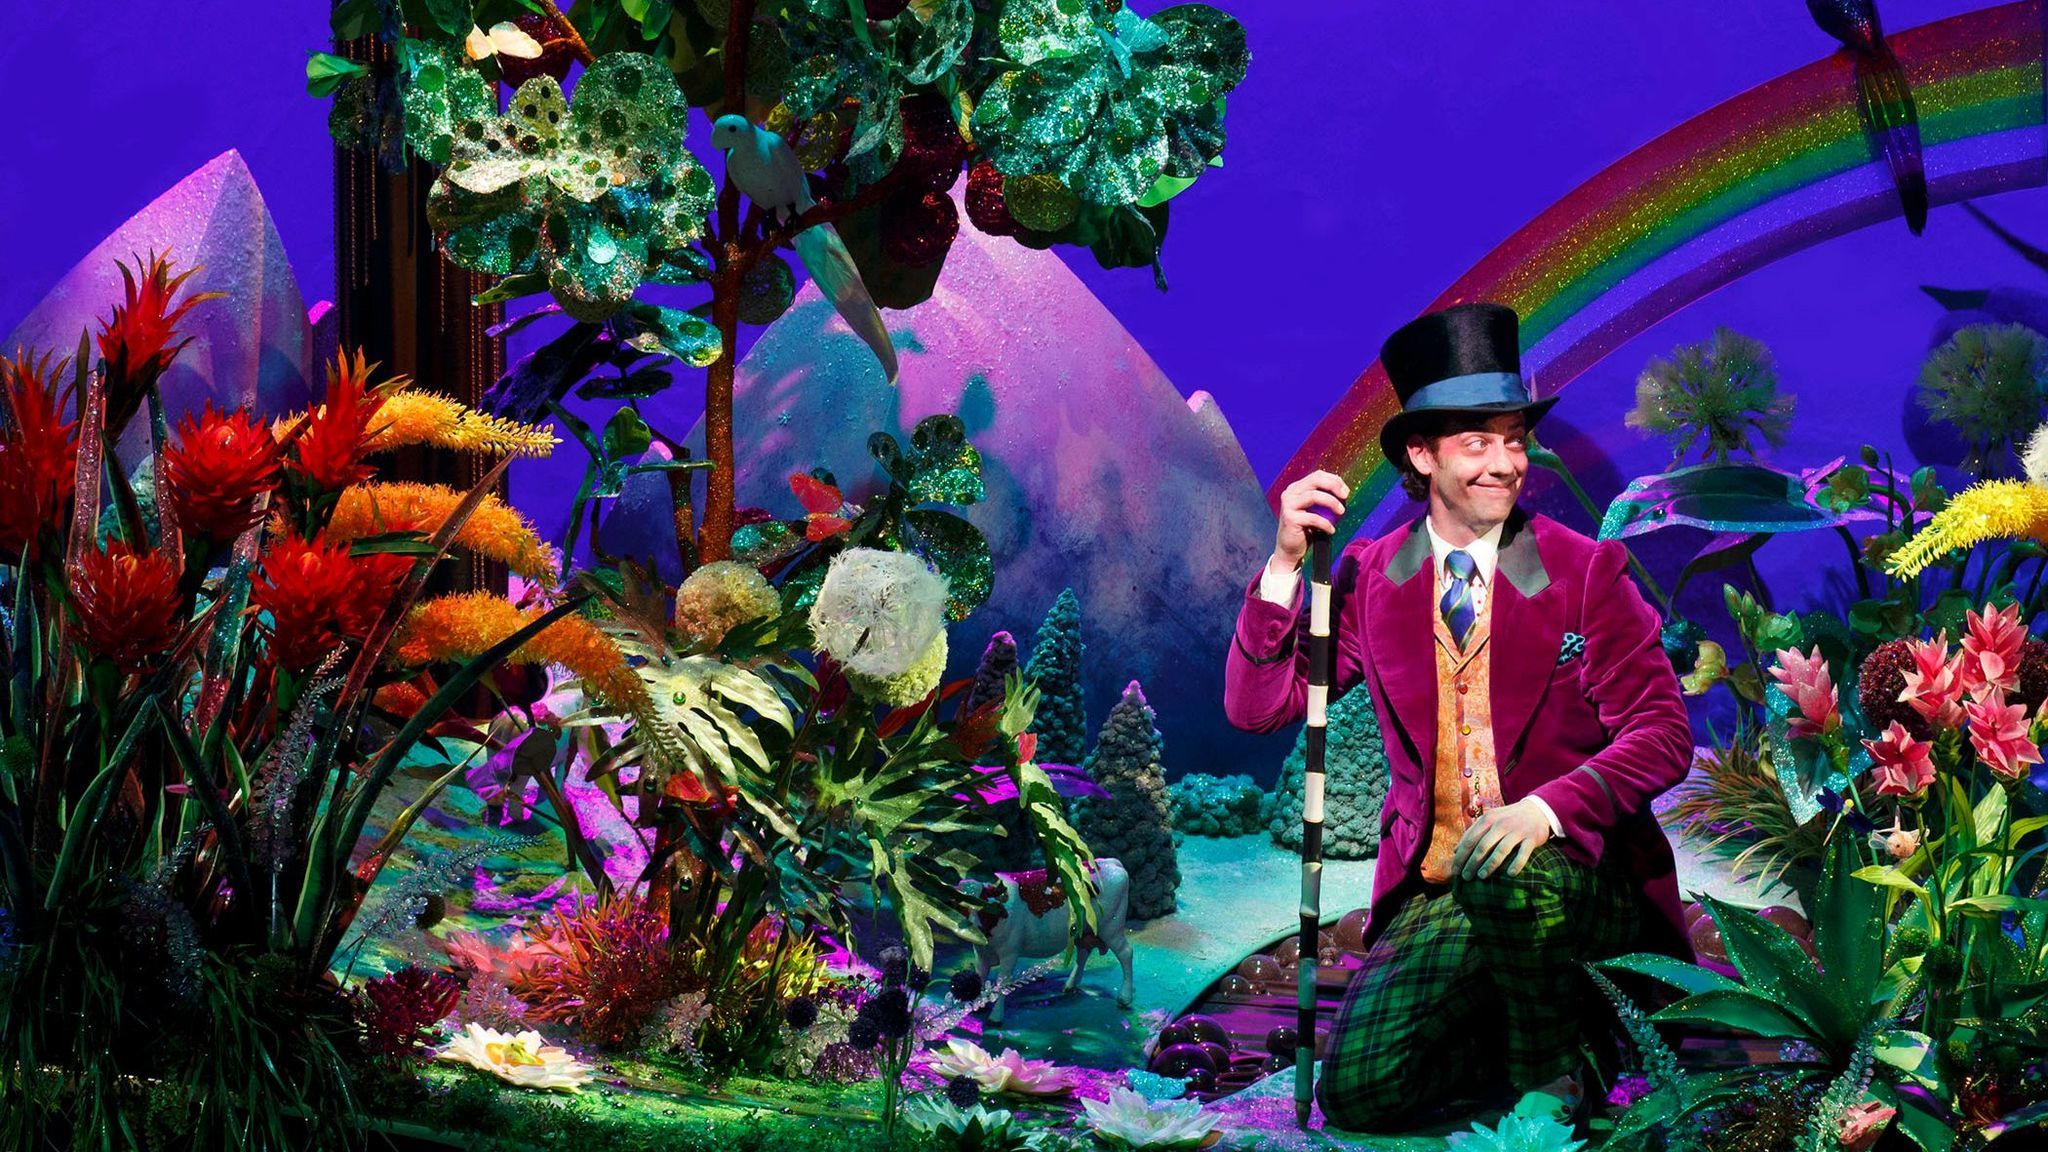 Christian Borle in "Charlie and the Chocolate Factory."